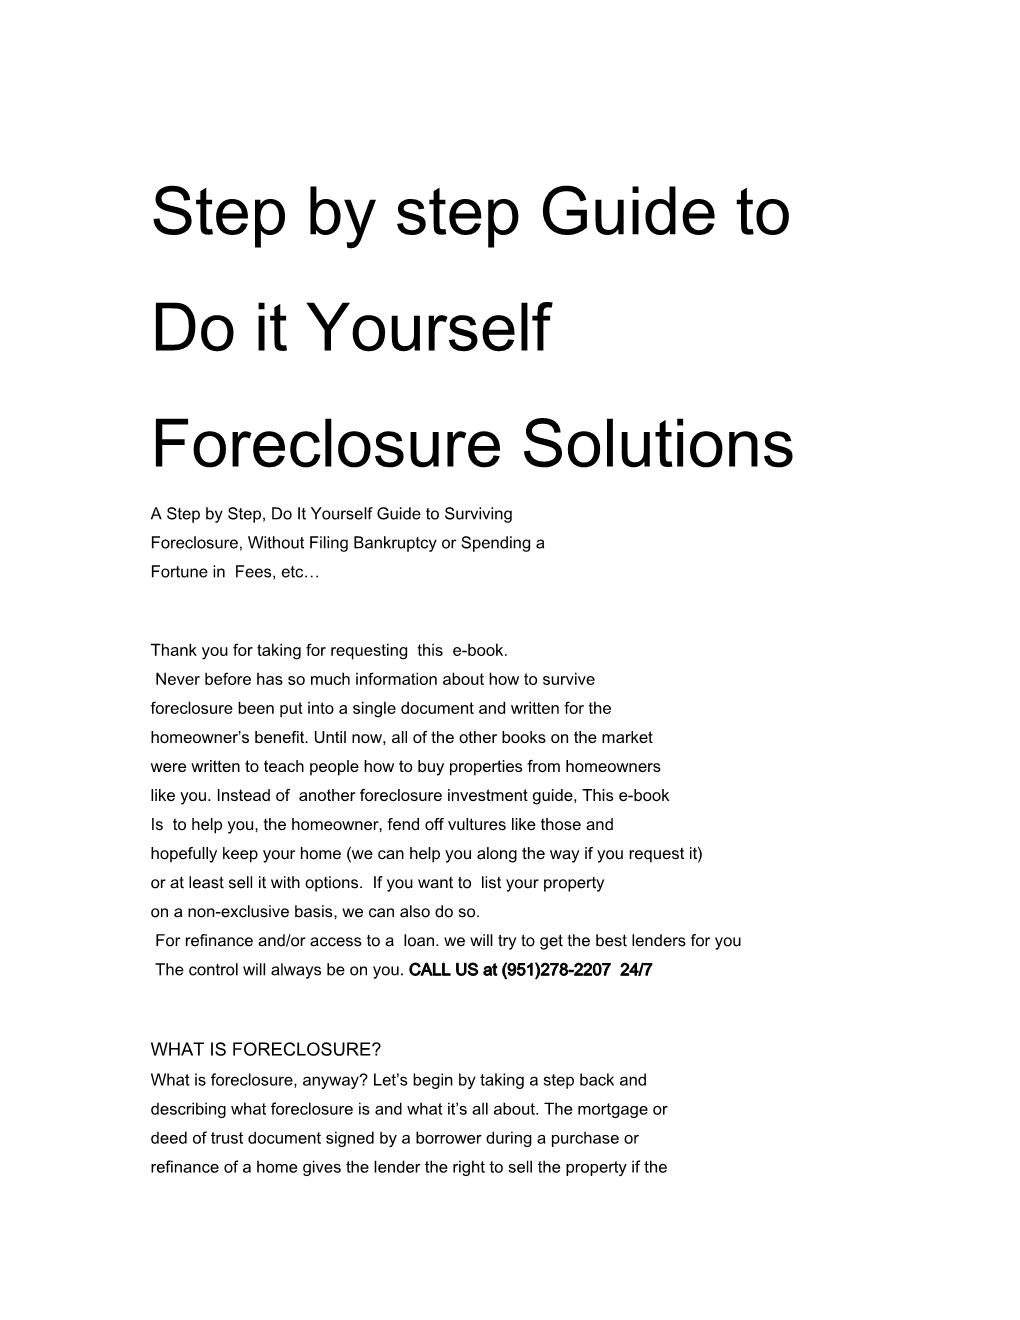 Step by Step Guide to Do It Yourself Foreclosure Solutions